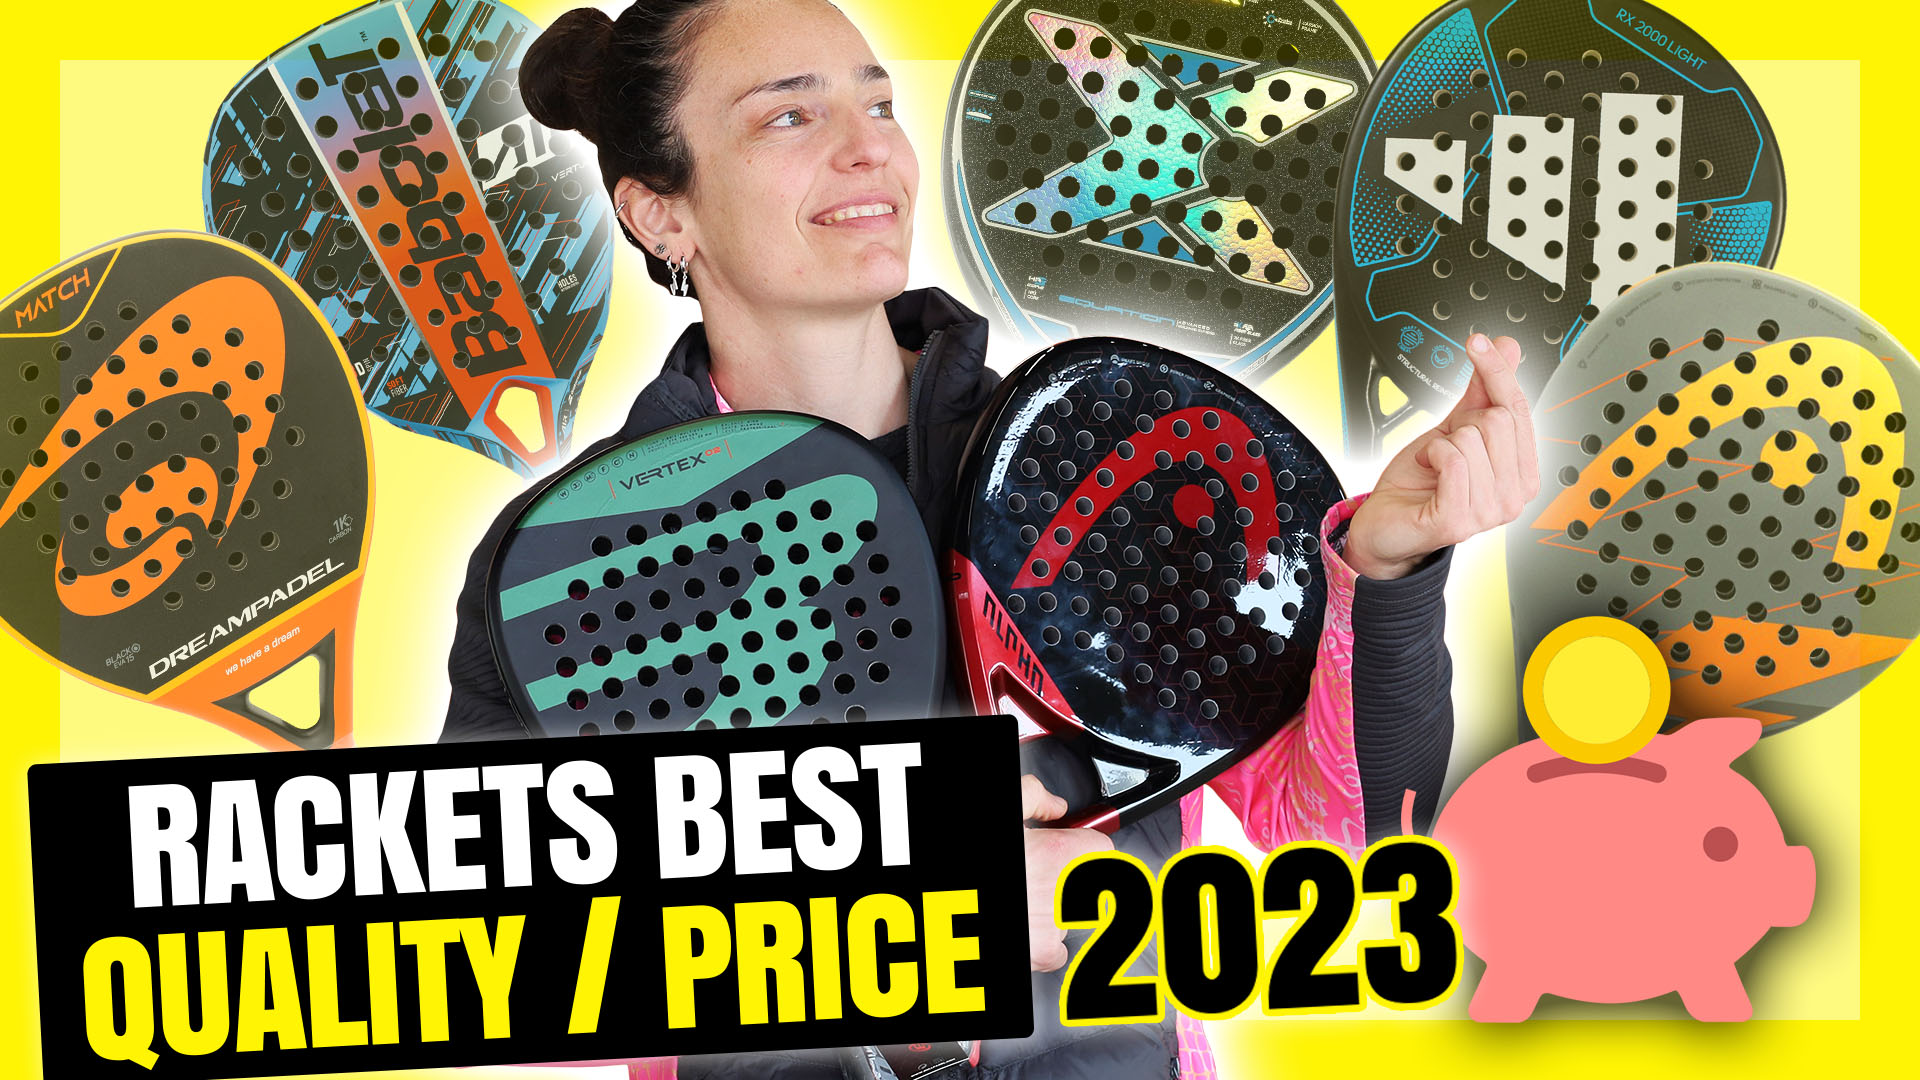 Best price-quality padel rackets of 2023, level up